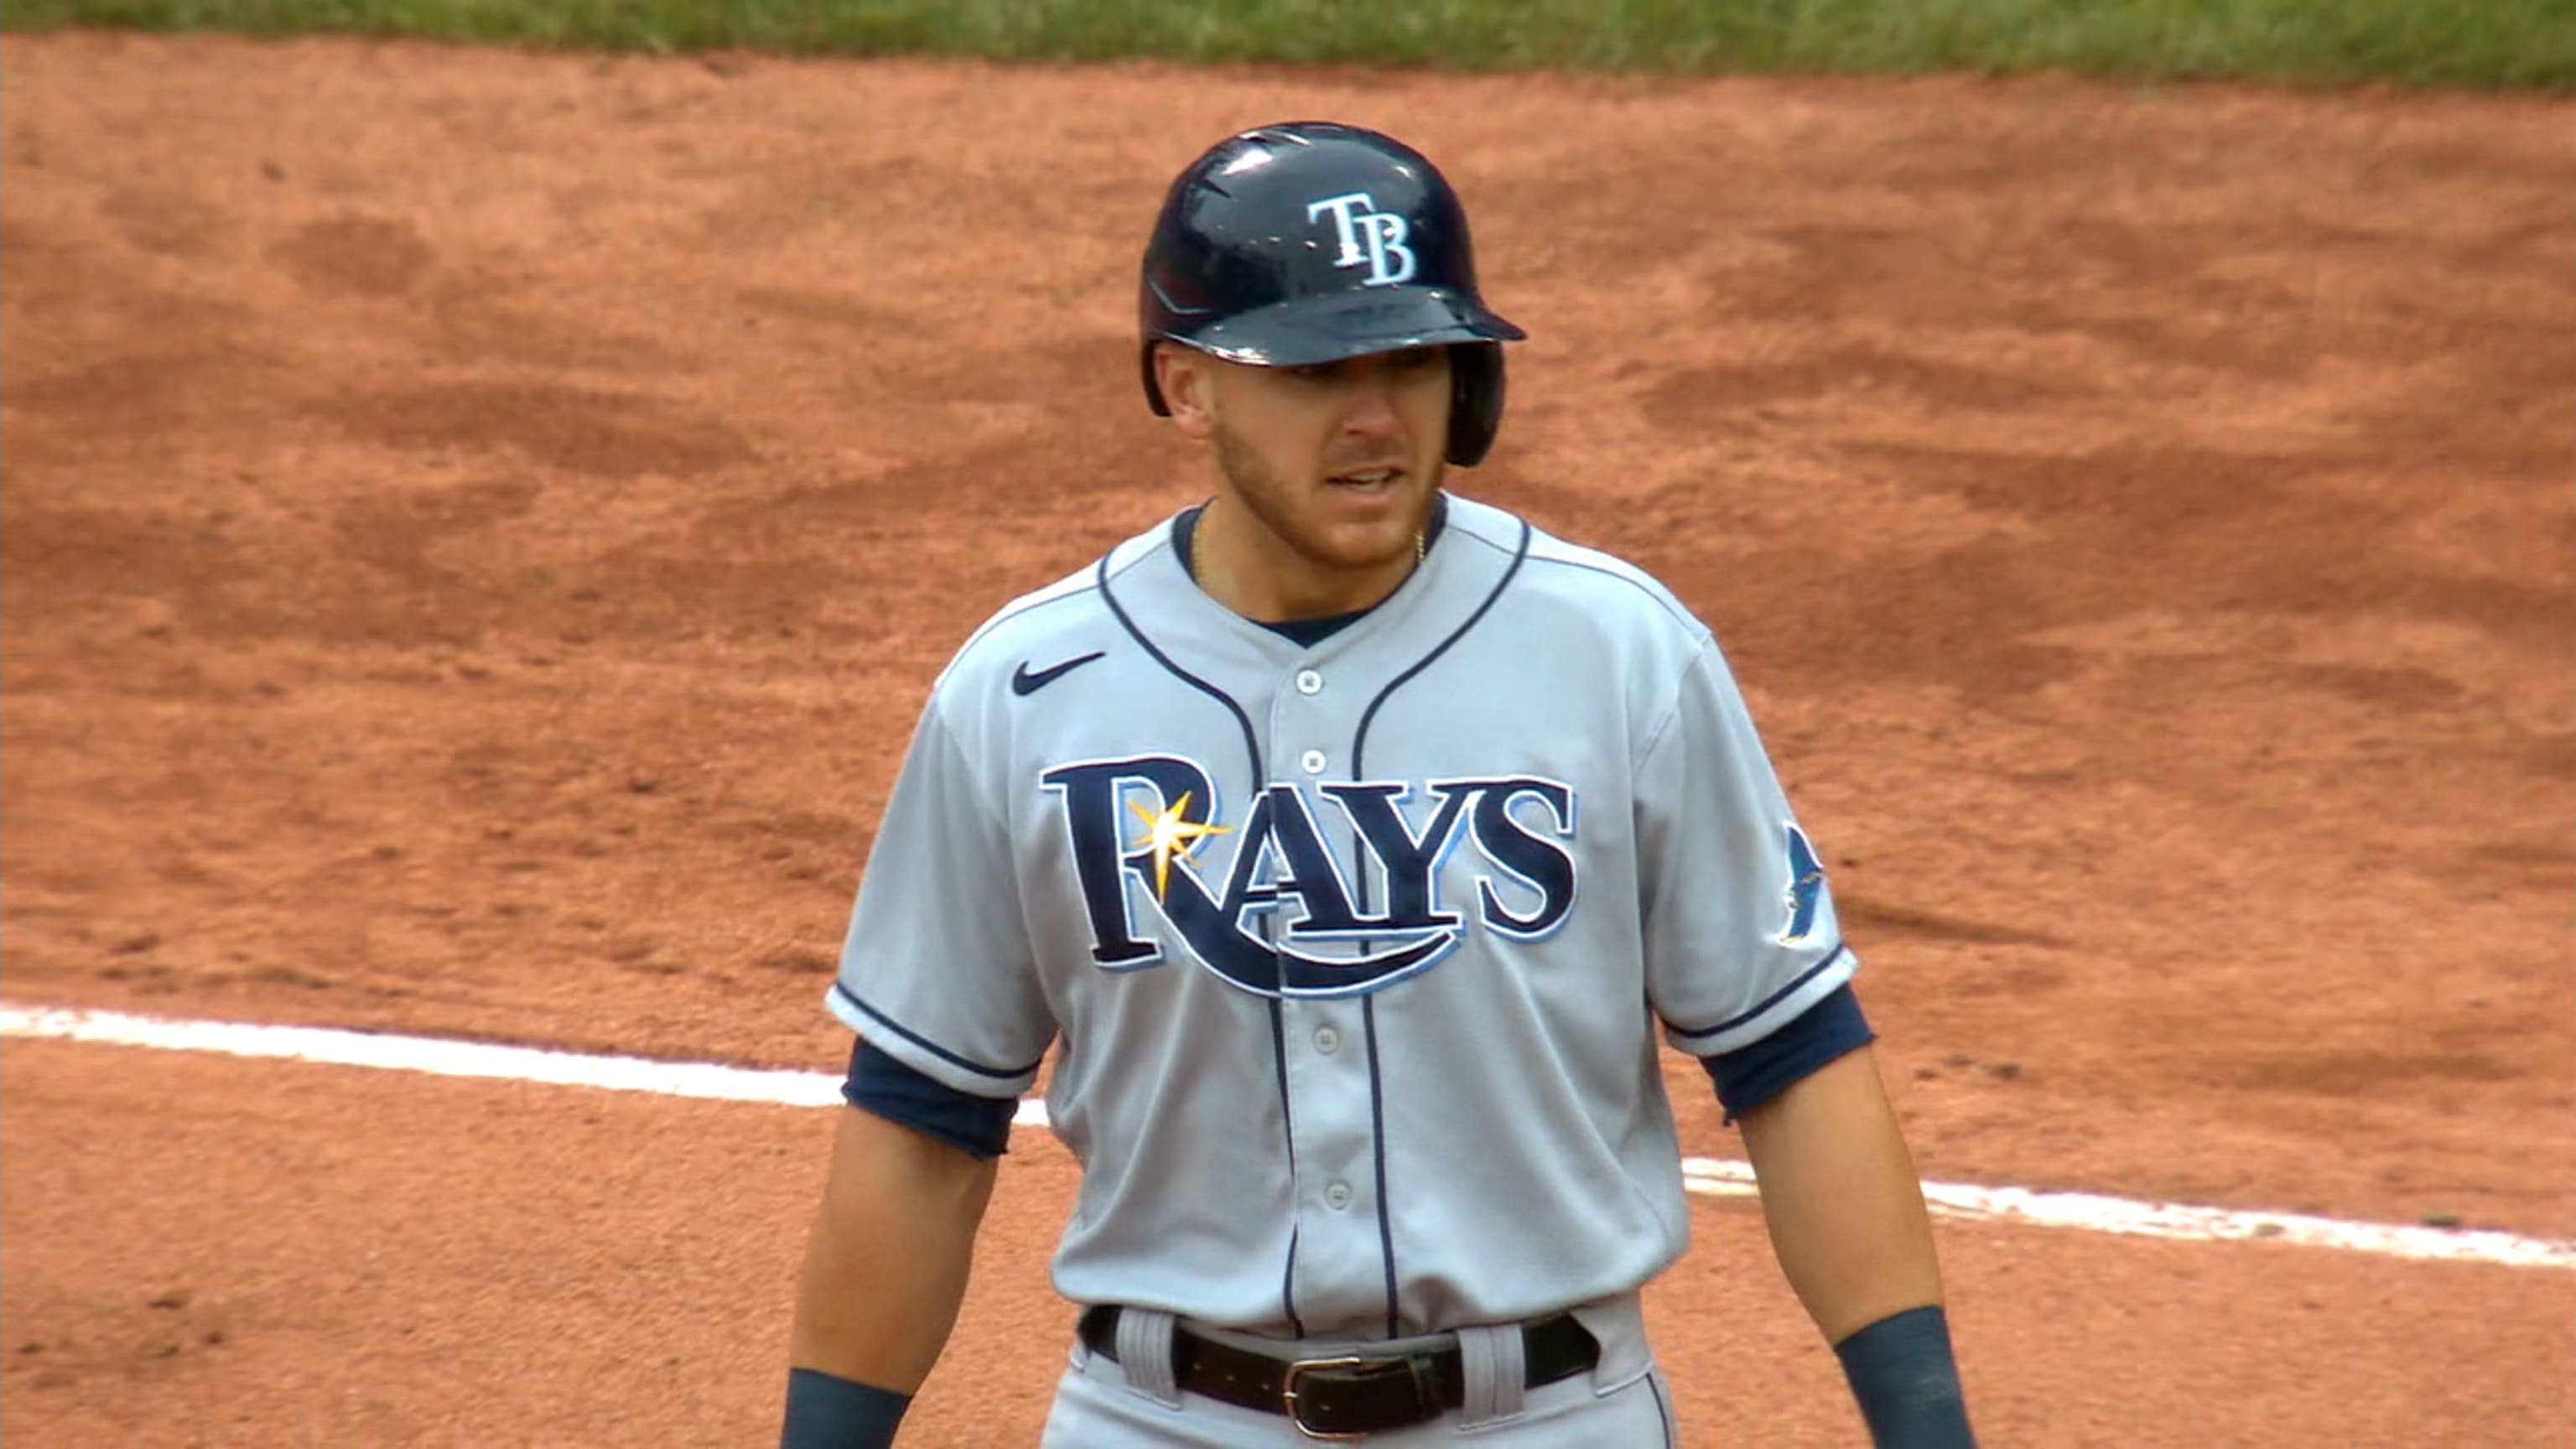 How many innings were enough in Rays' loss to Red Sox?